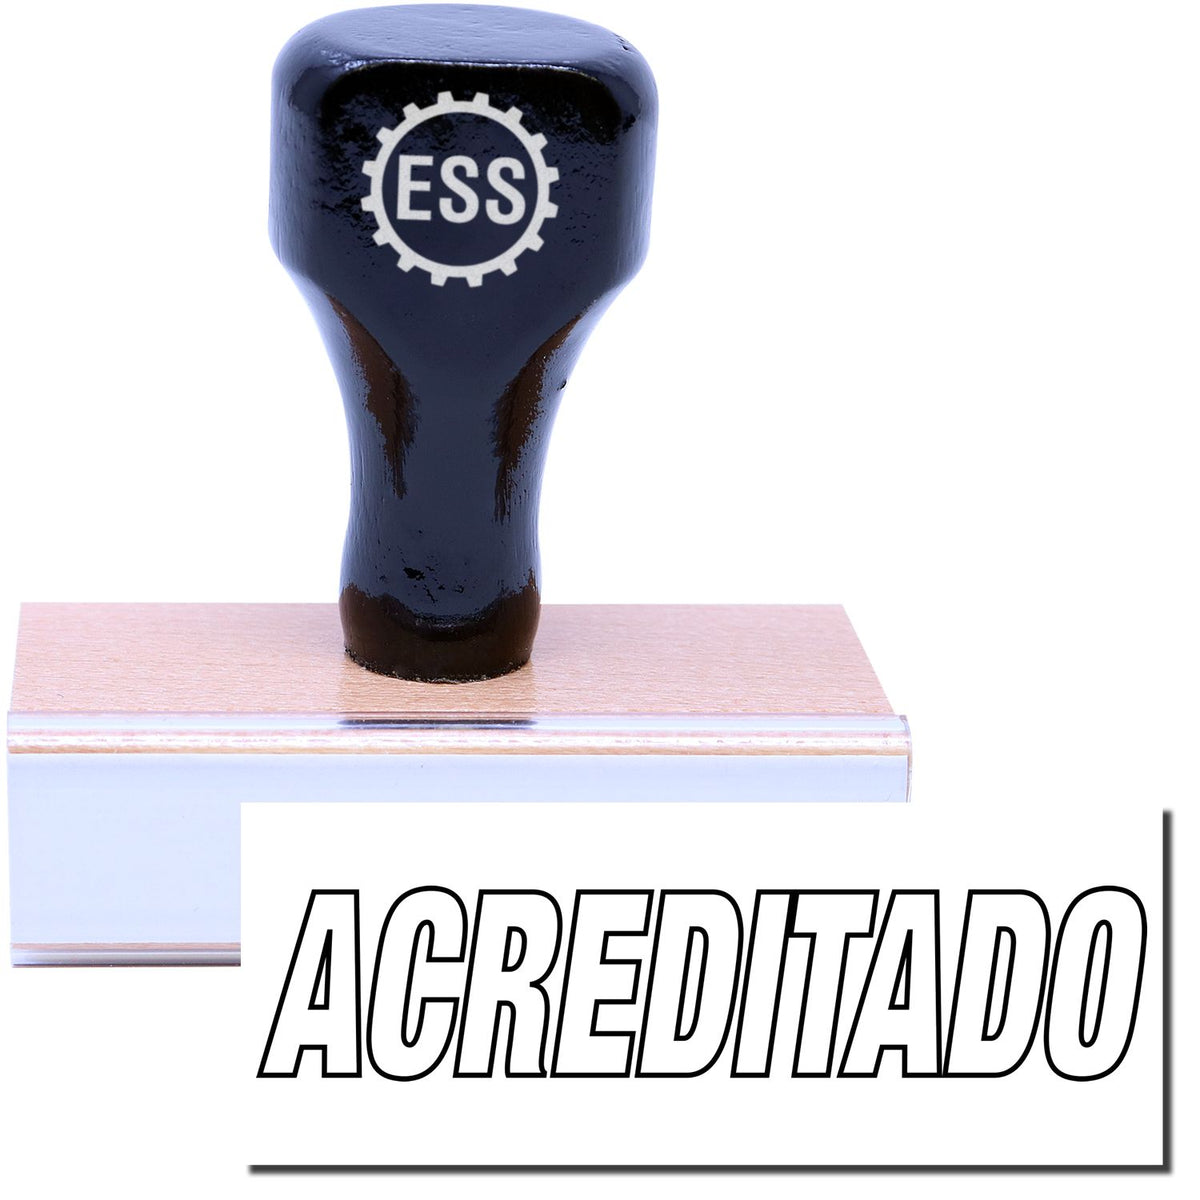 A stock office rubber stamp with a stamped image showing how the text &quot;ACREDITADO&quot; in an outline font is displayed after stamping.